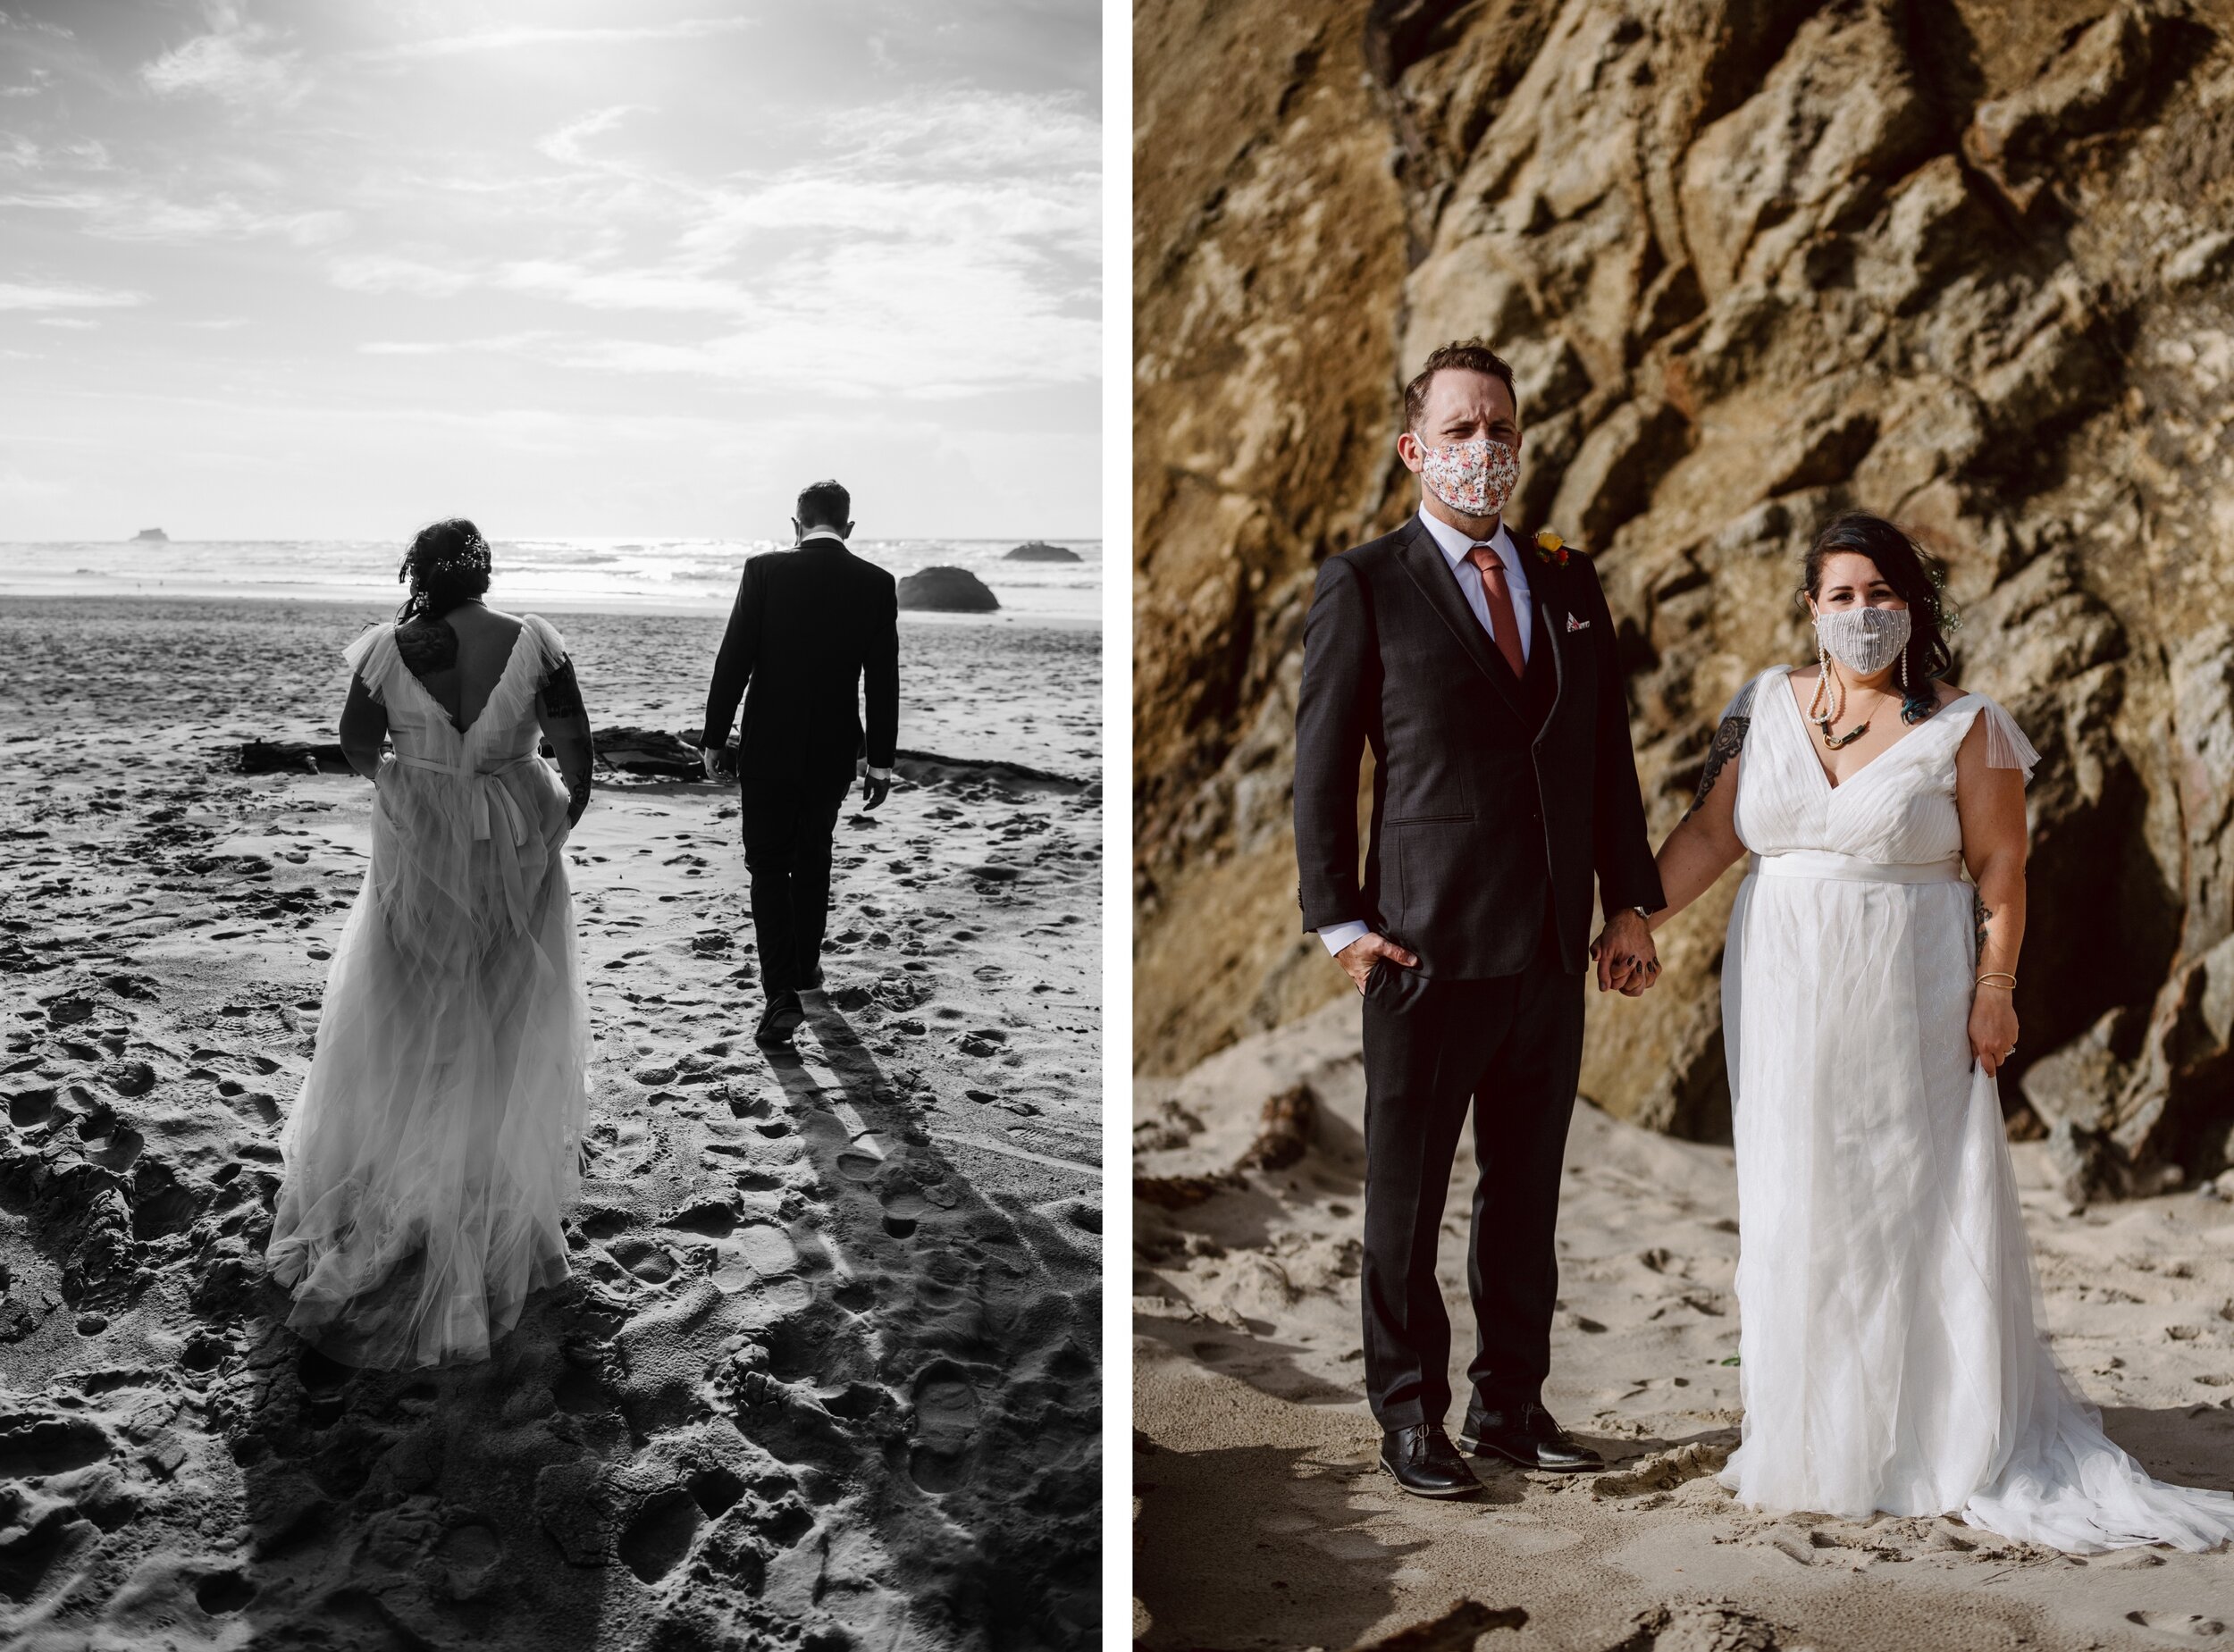 A bride and groom walk on the beach at sunset after their elopement and then pose with stylized masks in front of beach rocks